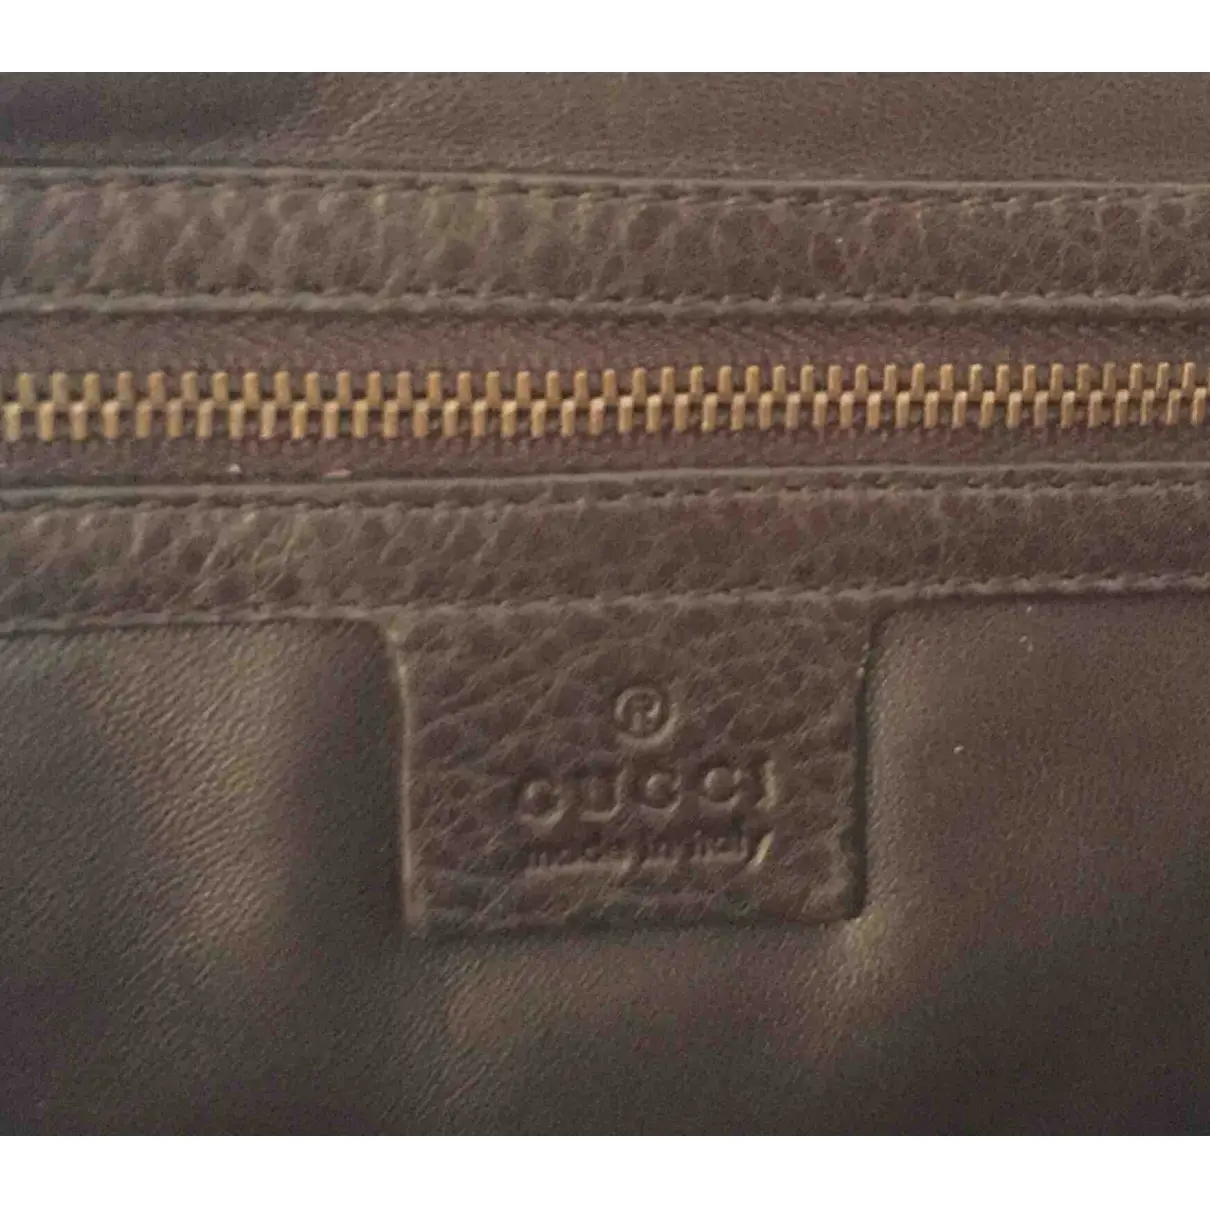 Buy Gucci Bamboo leather clutch bag online